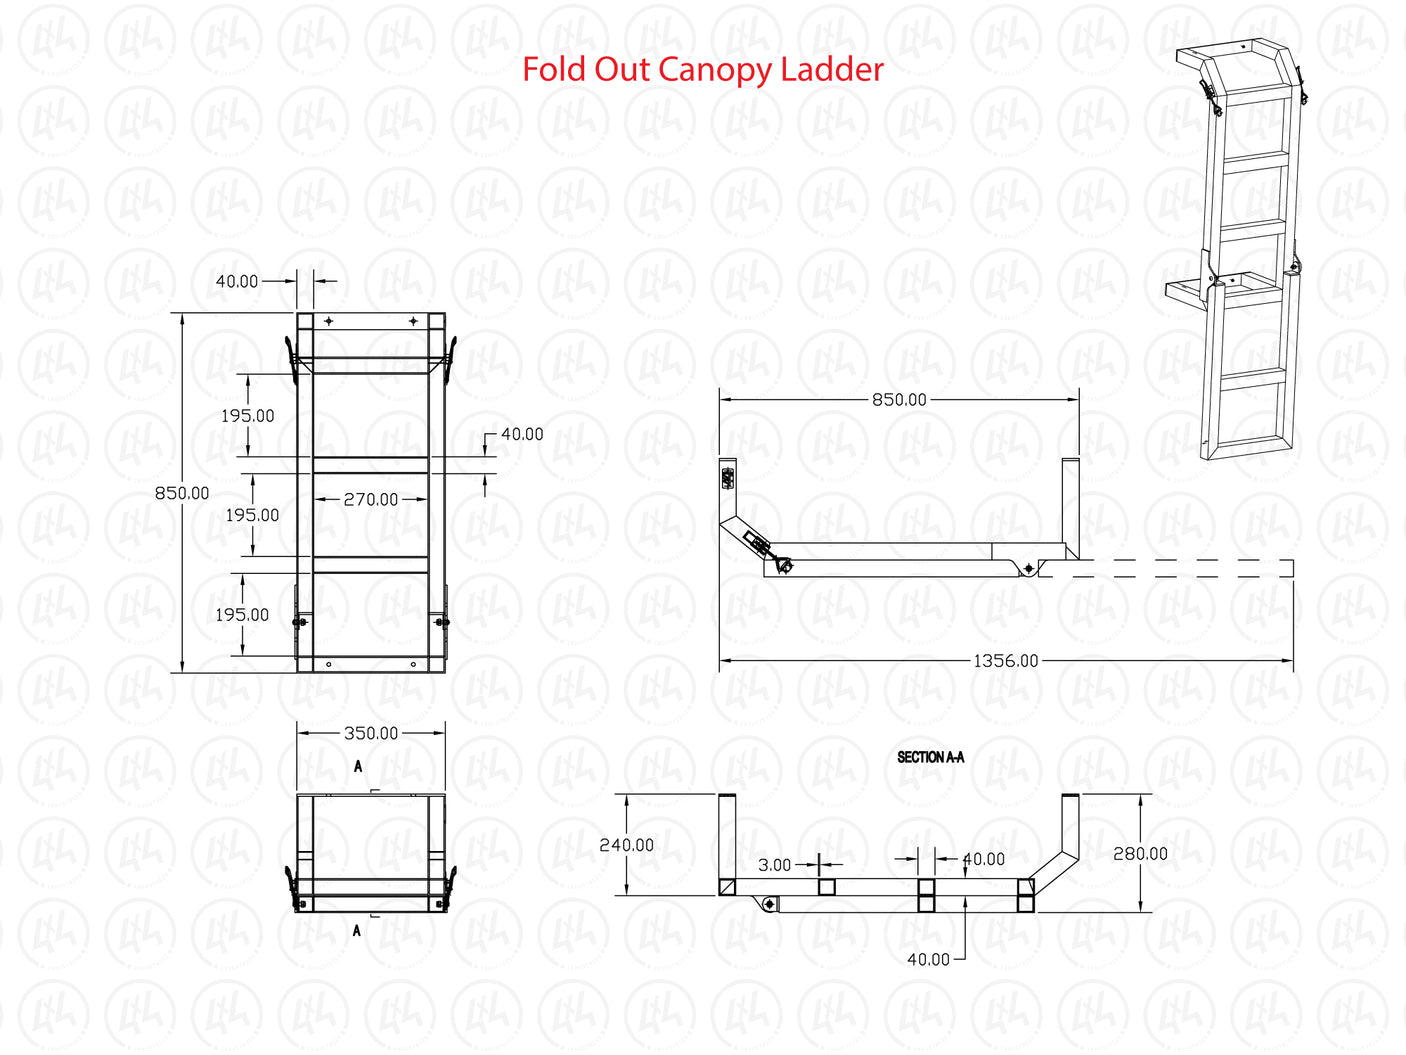 Canopy Ladder Fold Out